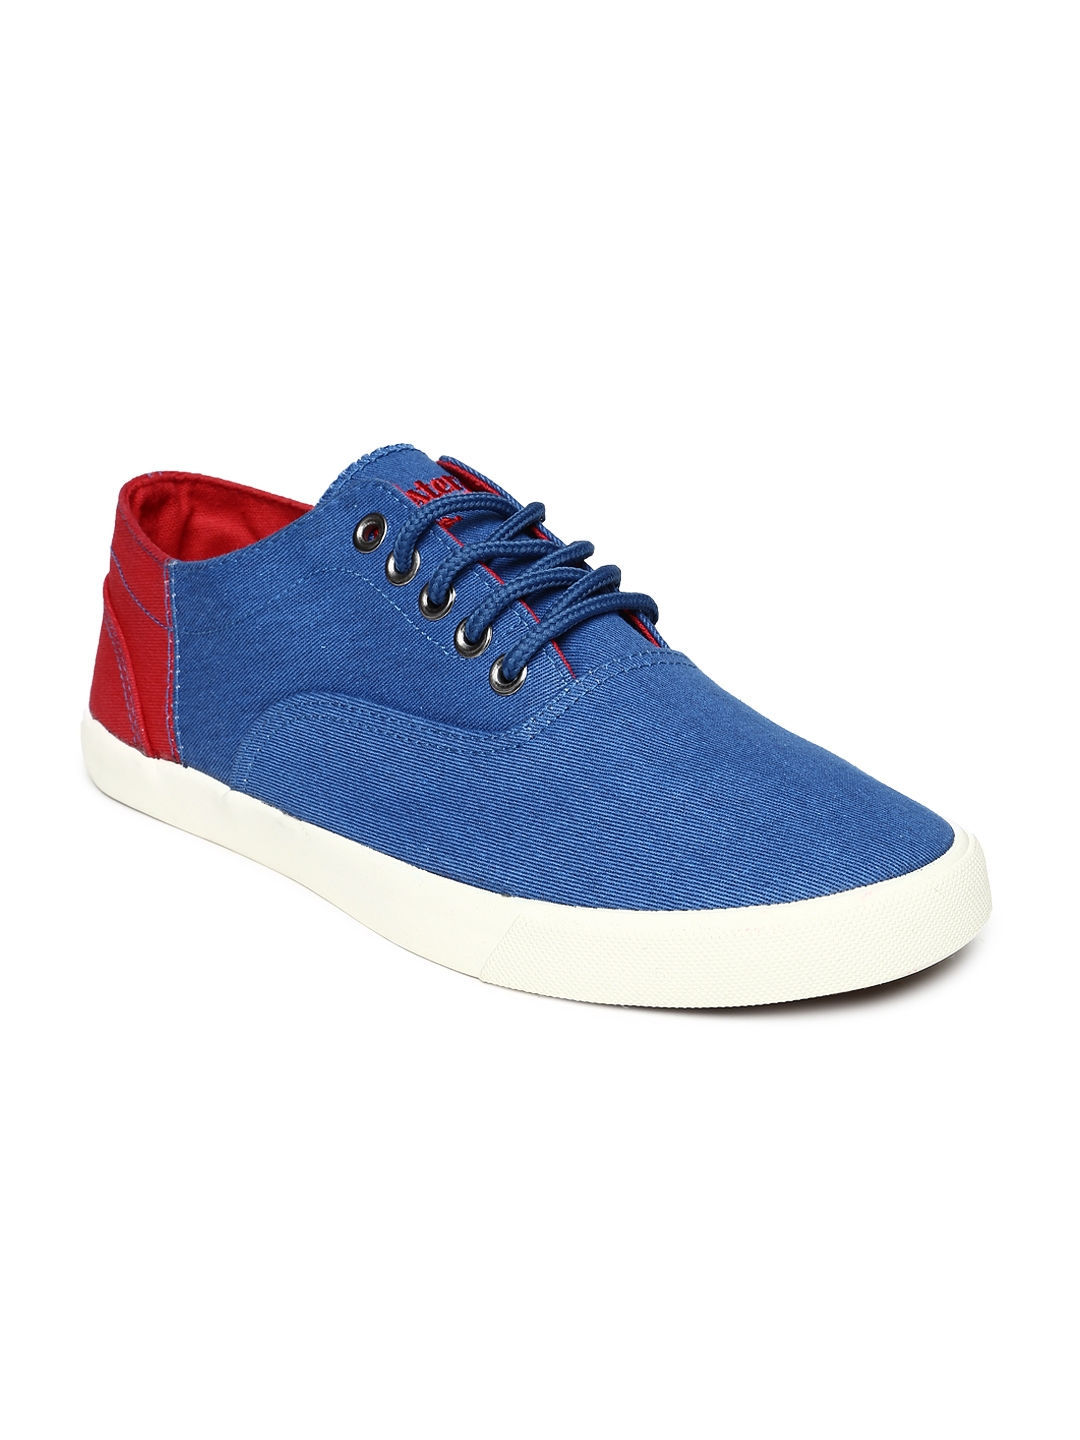 Buy Roadster Men Blue Casual Shoes - Casual Shoes for Men 744753 | Myntra